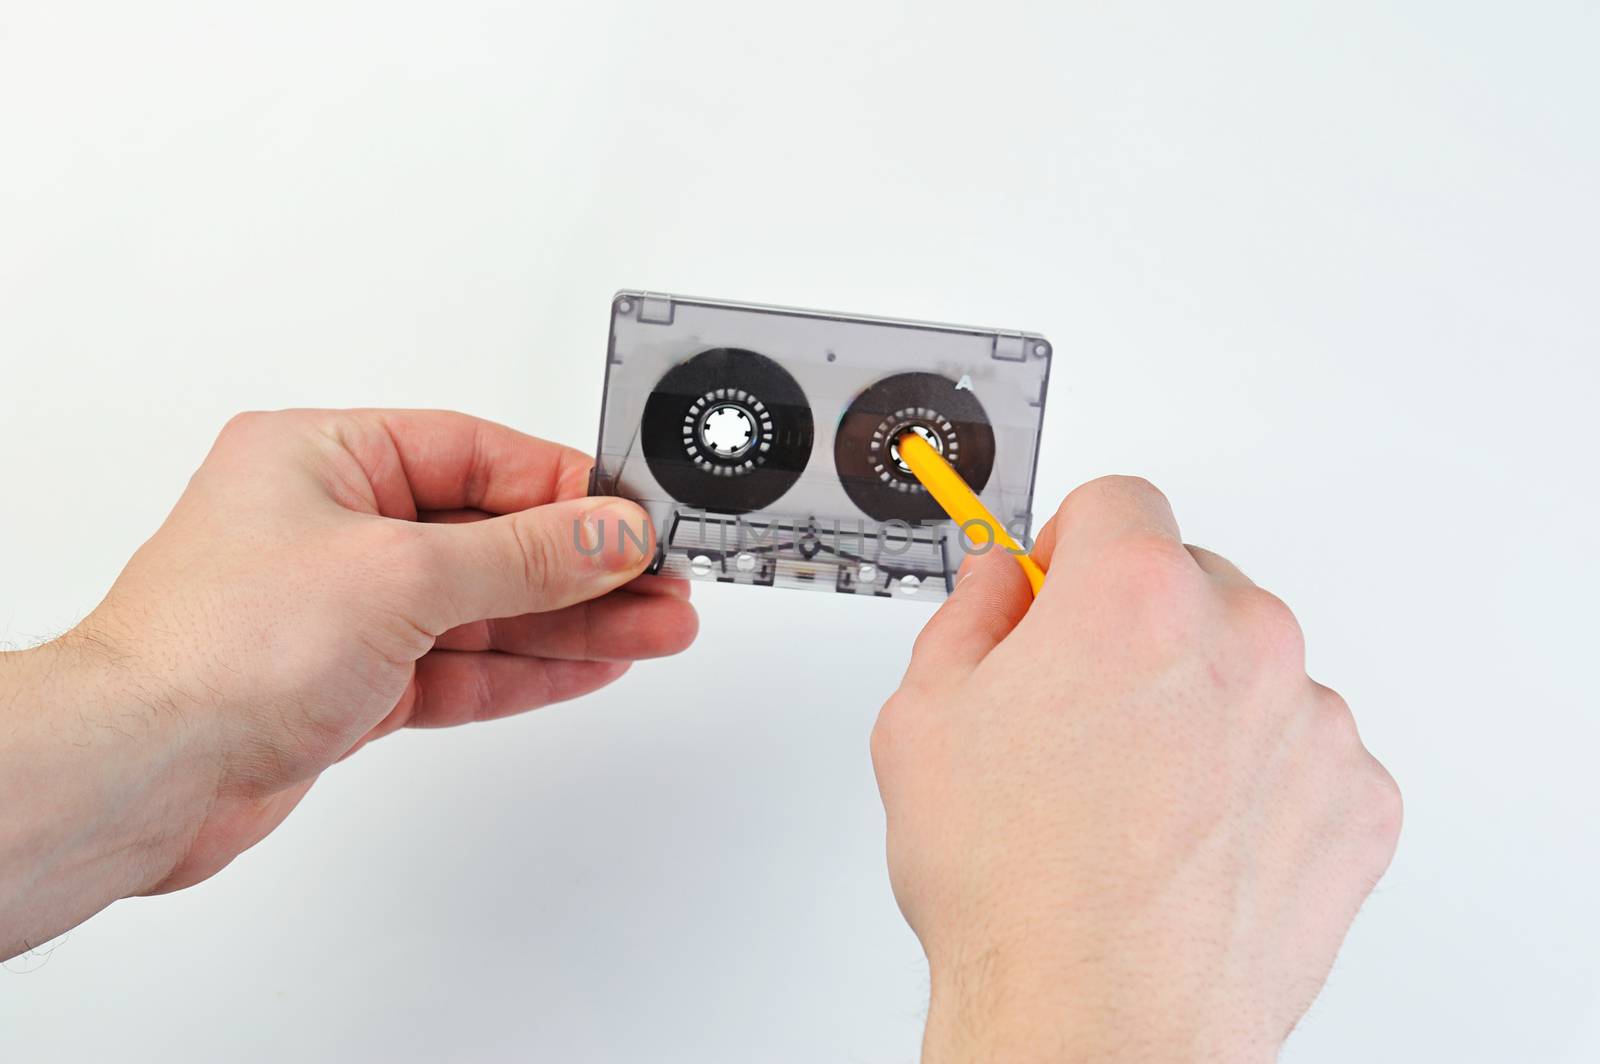 rewind audio casette with tape on a white background